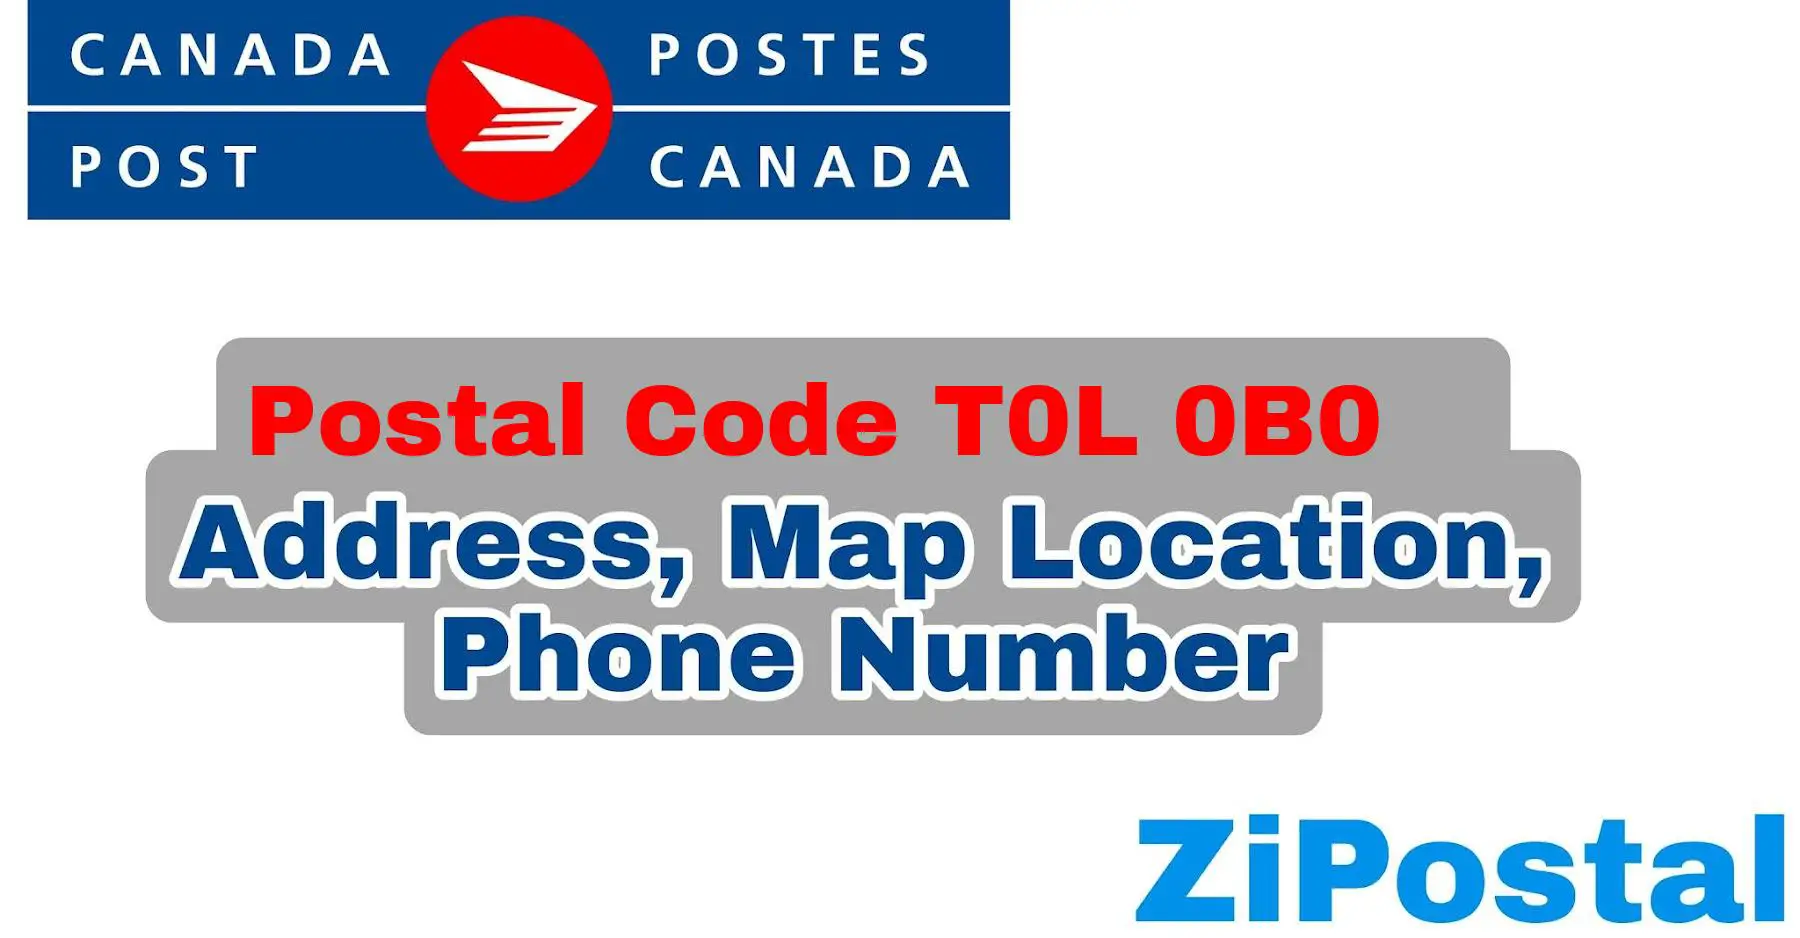 Postal Code T0L 0B0 Address Map Location and Phone Number